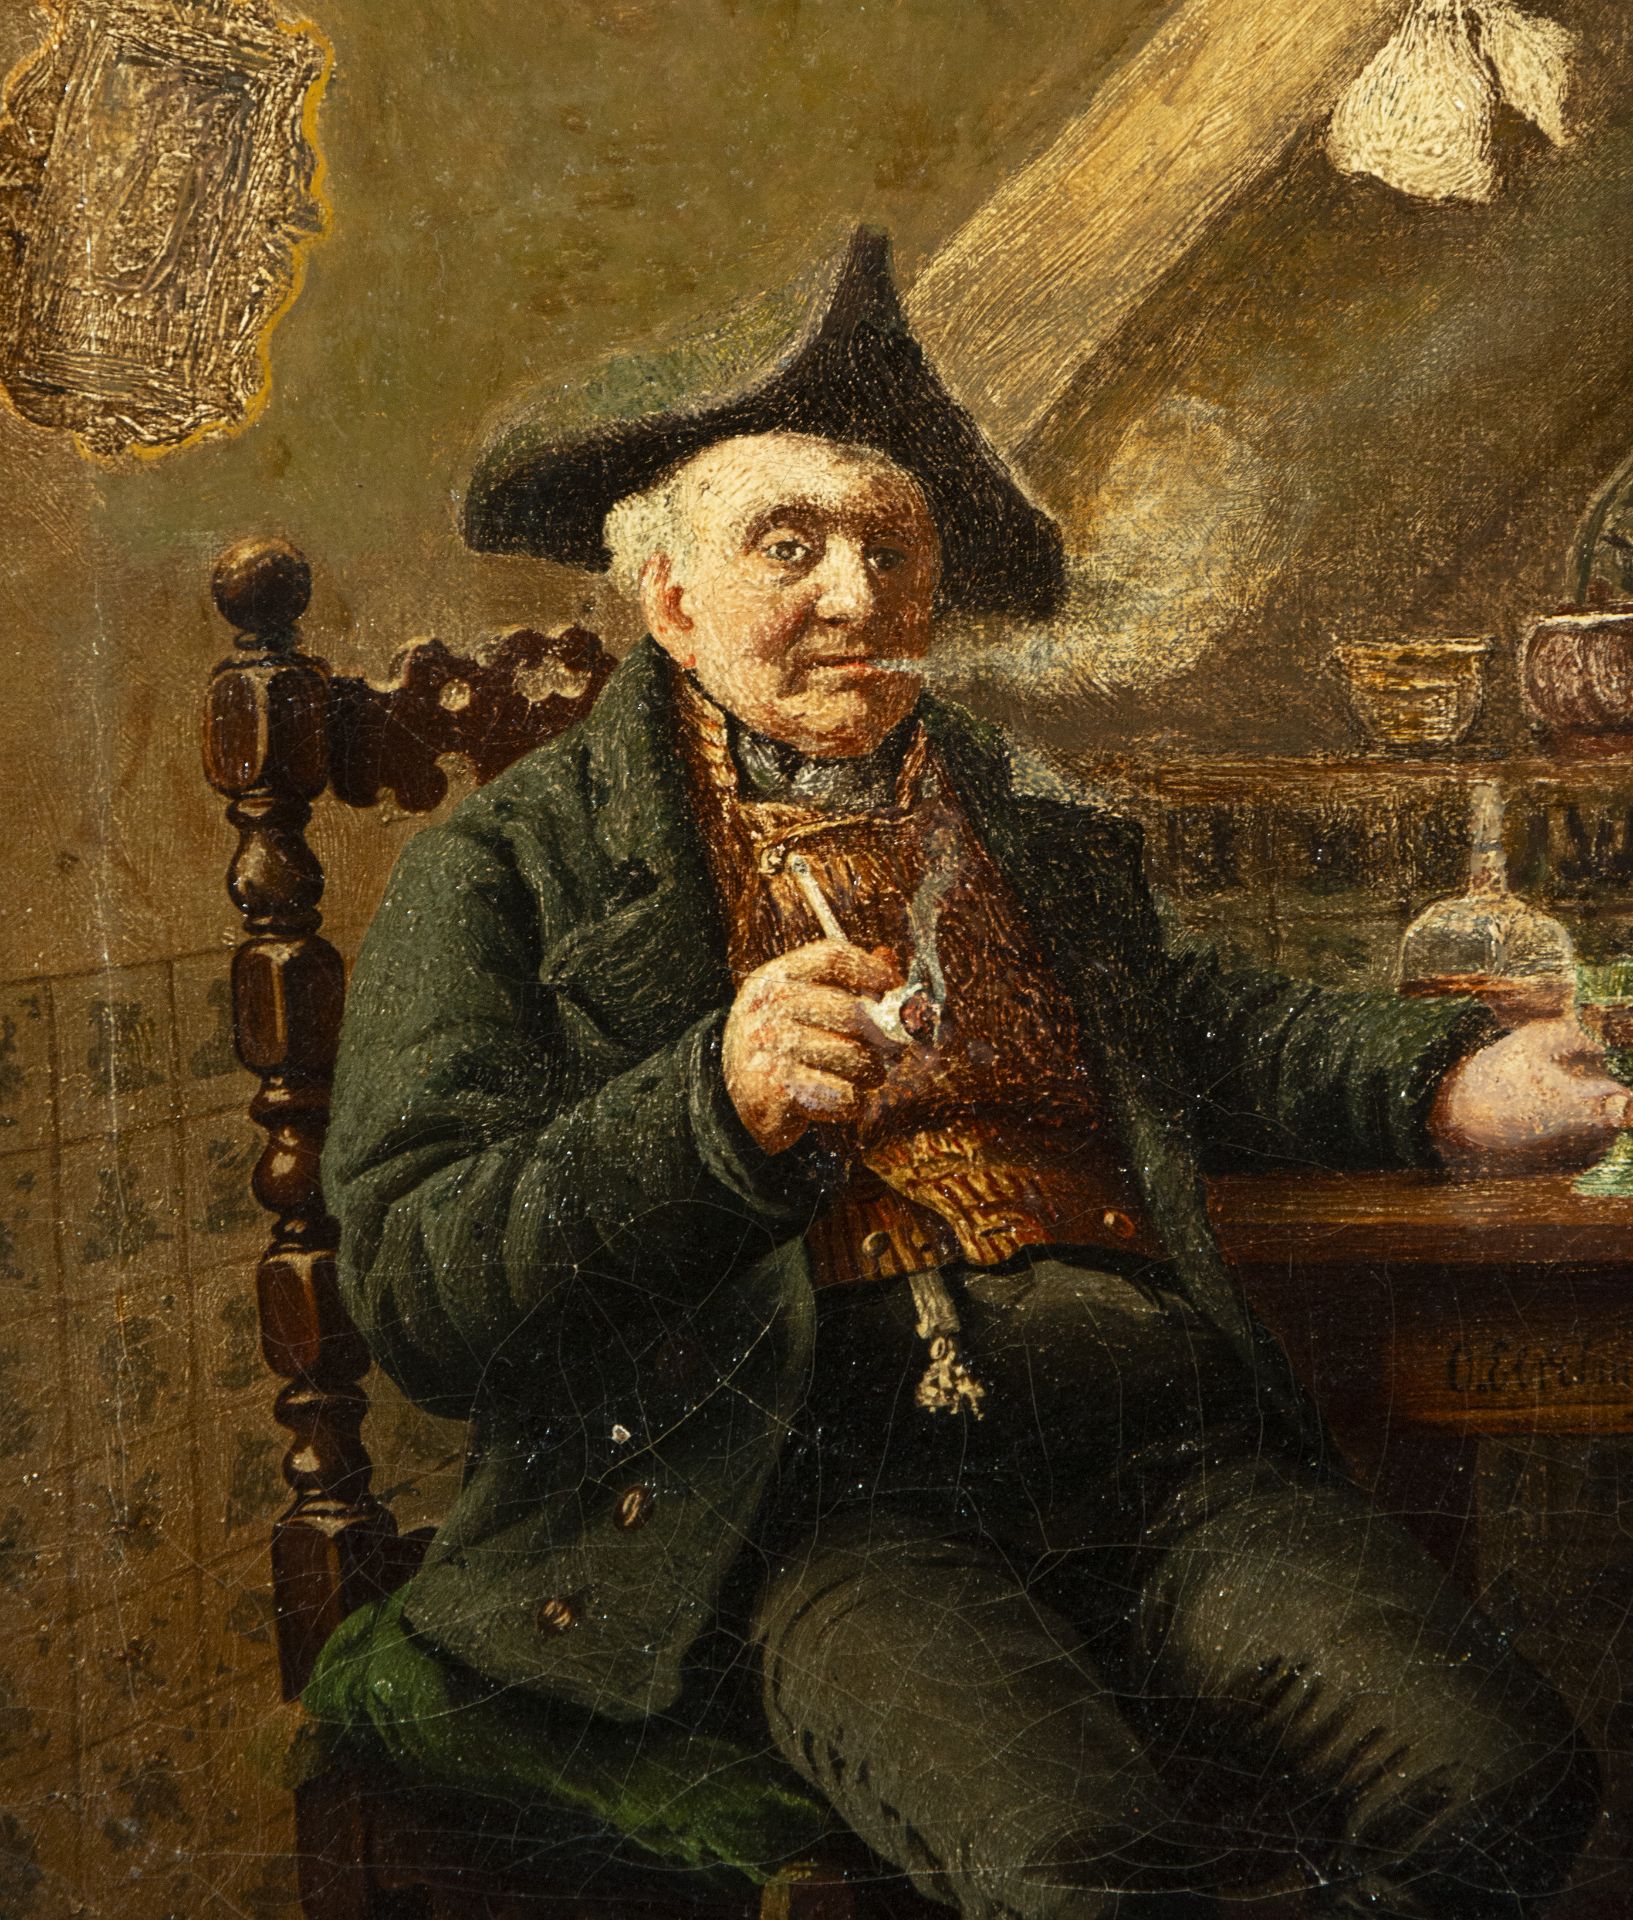 The Smoker, 19th century Central European school, signed, Austria or Germany - Image 2 of 4